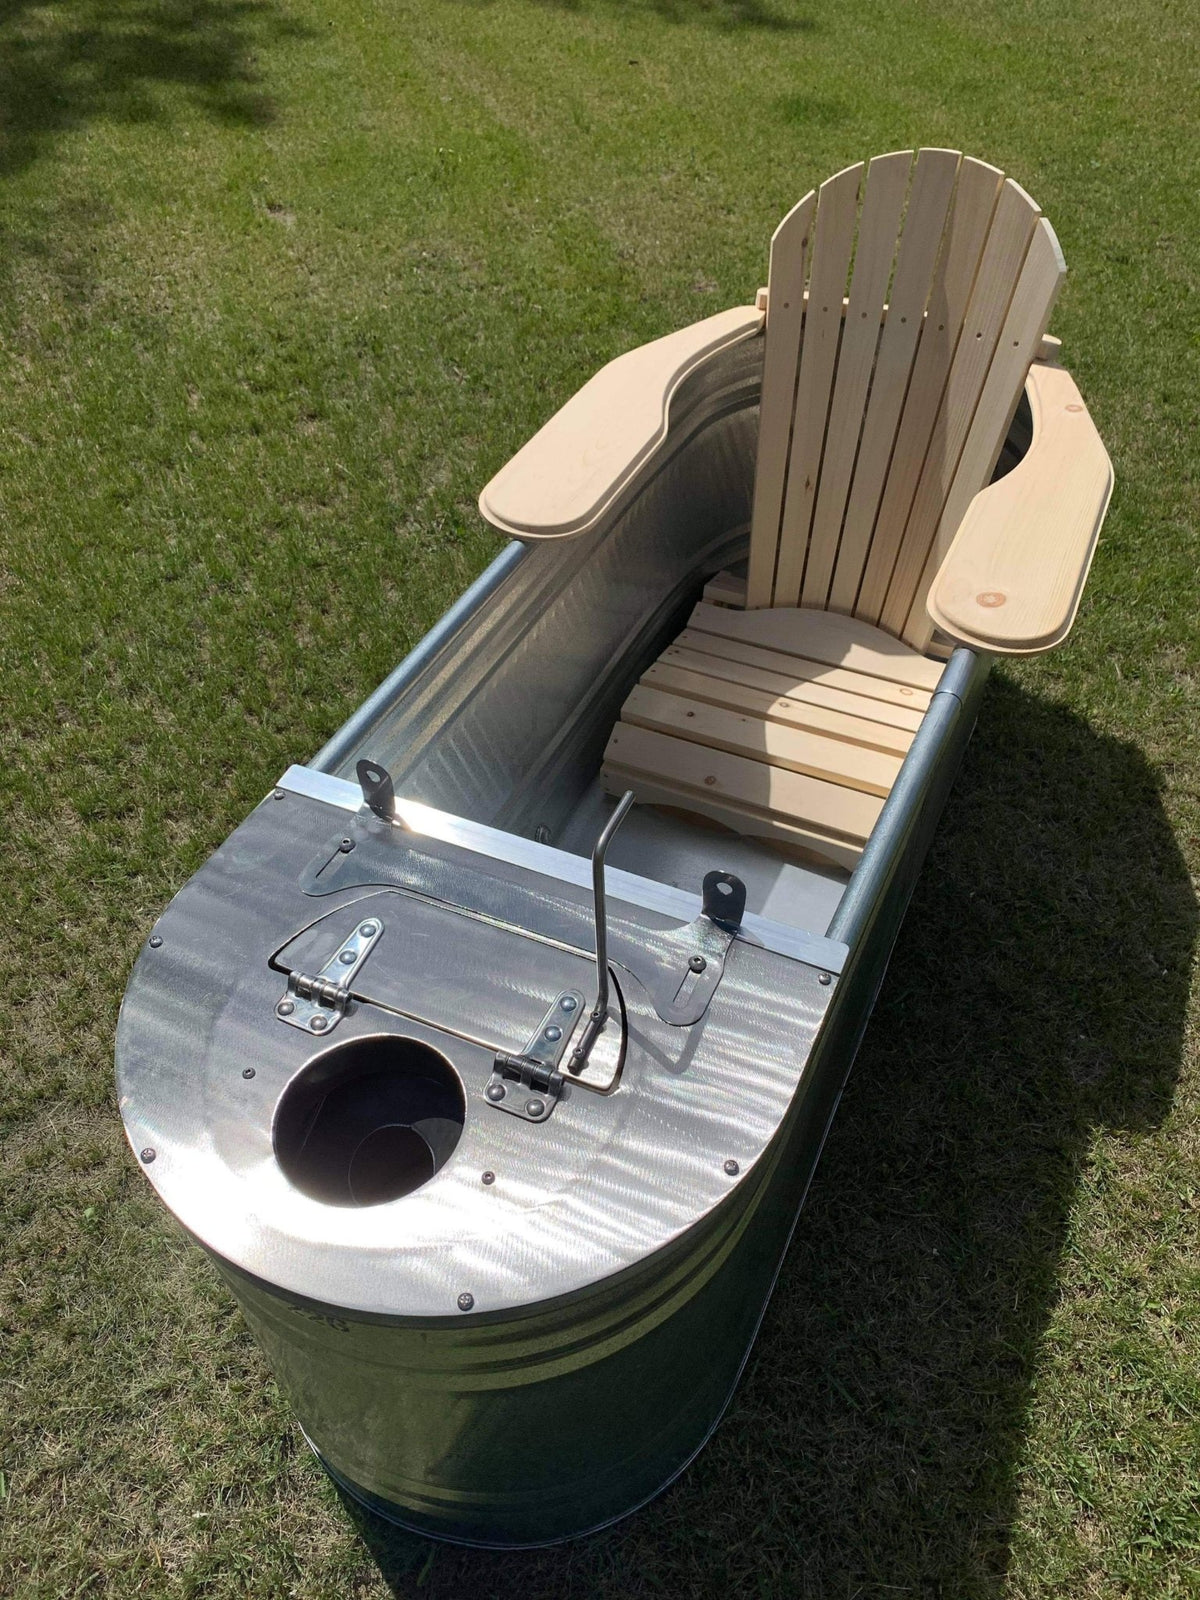 The &quot;Lone Ranger&quot; wood fired hot tub - Smokin Good Wood